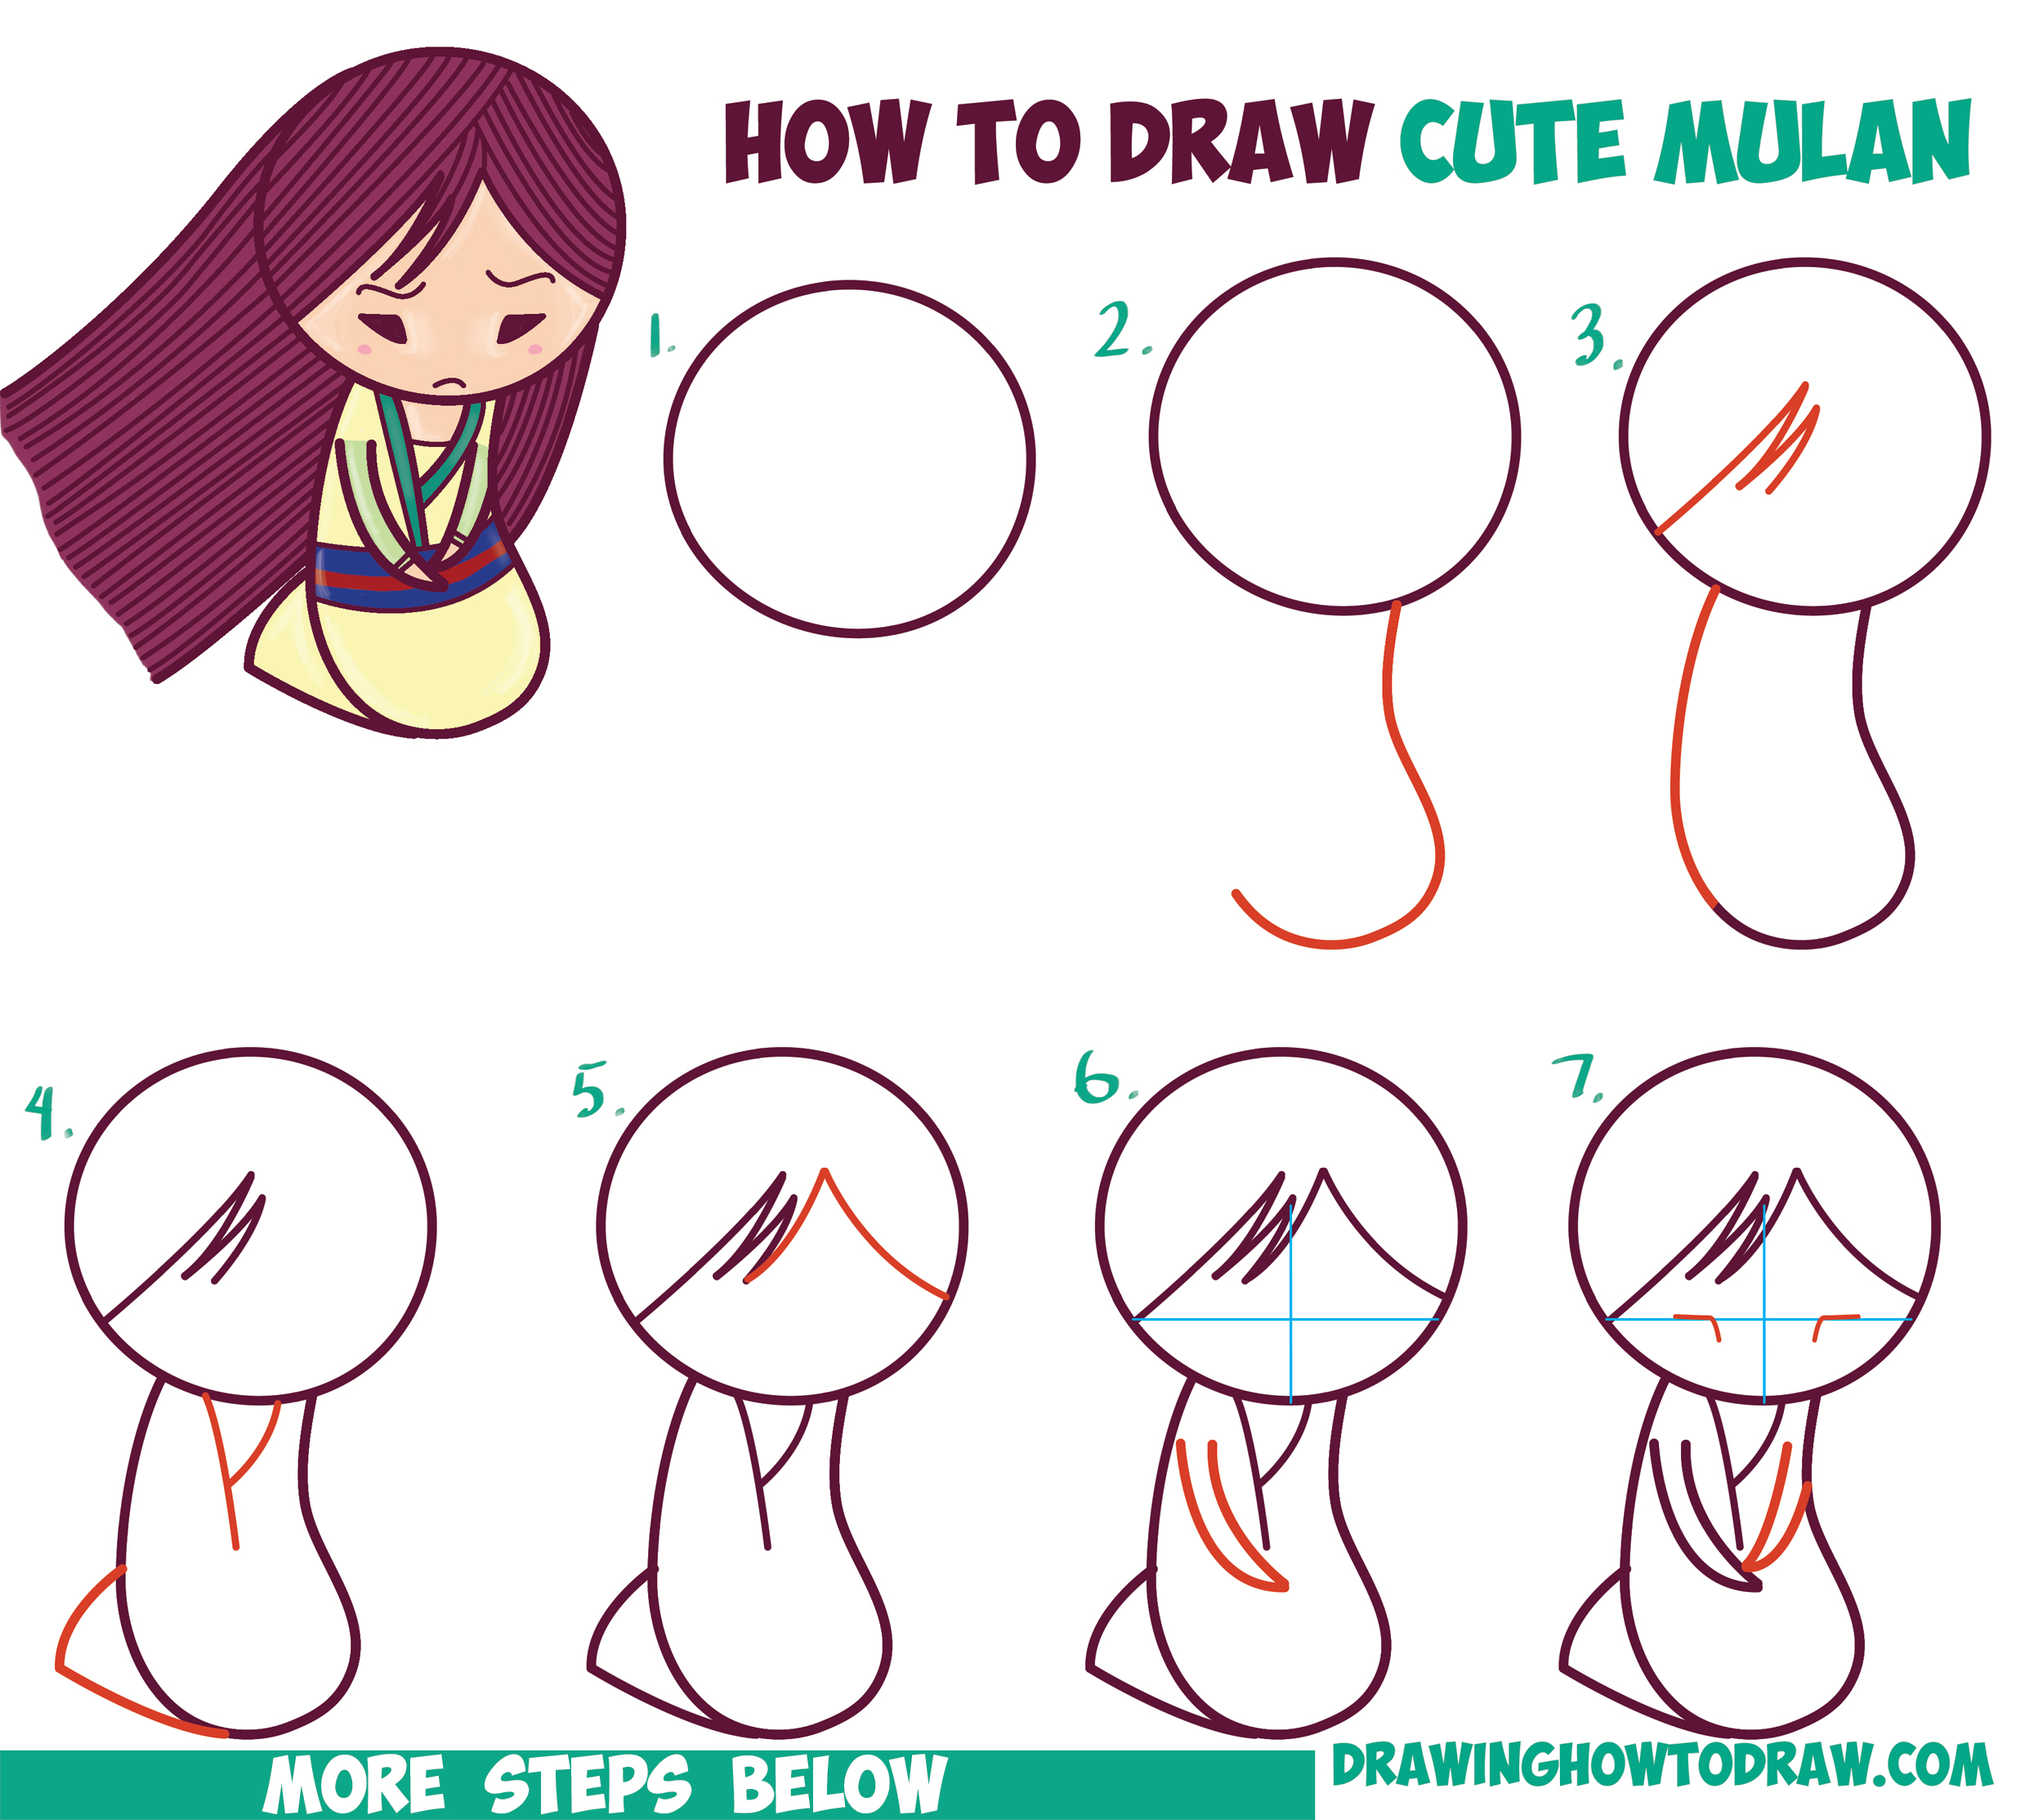 How to Draw Cute Kawaii Chibi Mulan the Chinese Disney Princess - Easy Step by Step Drawing Tutorial for Beginners